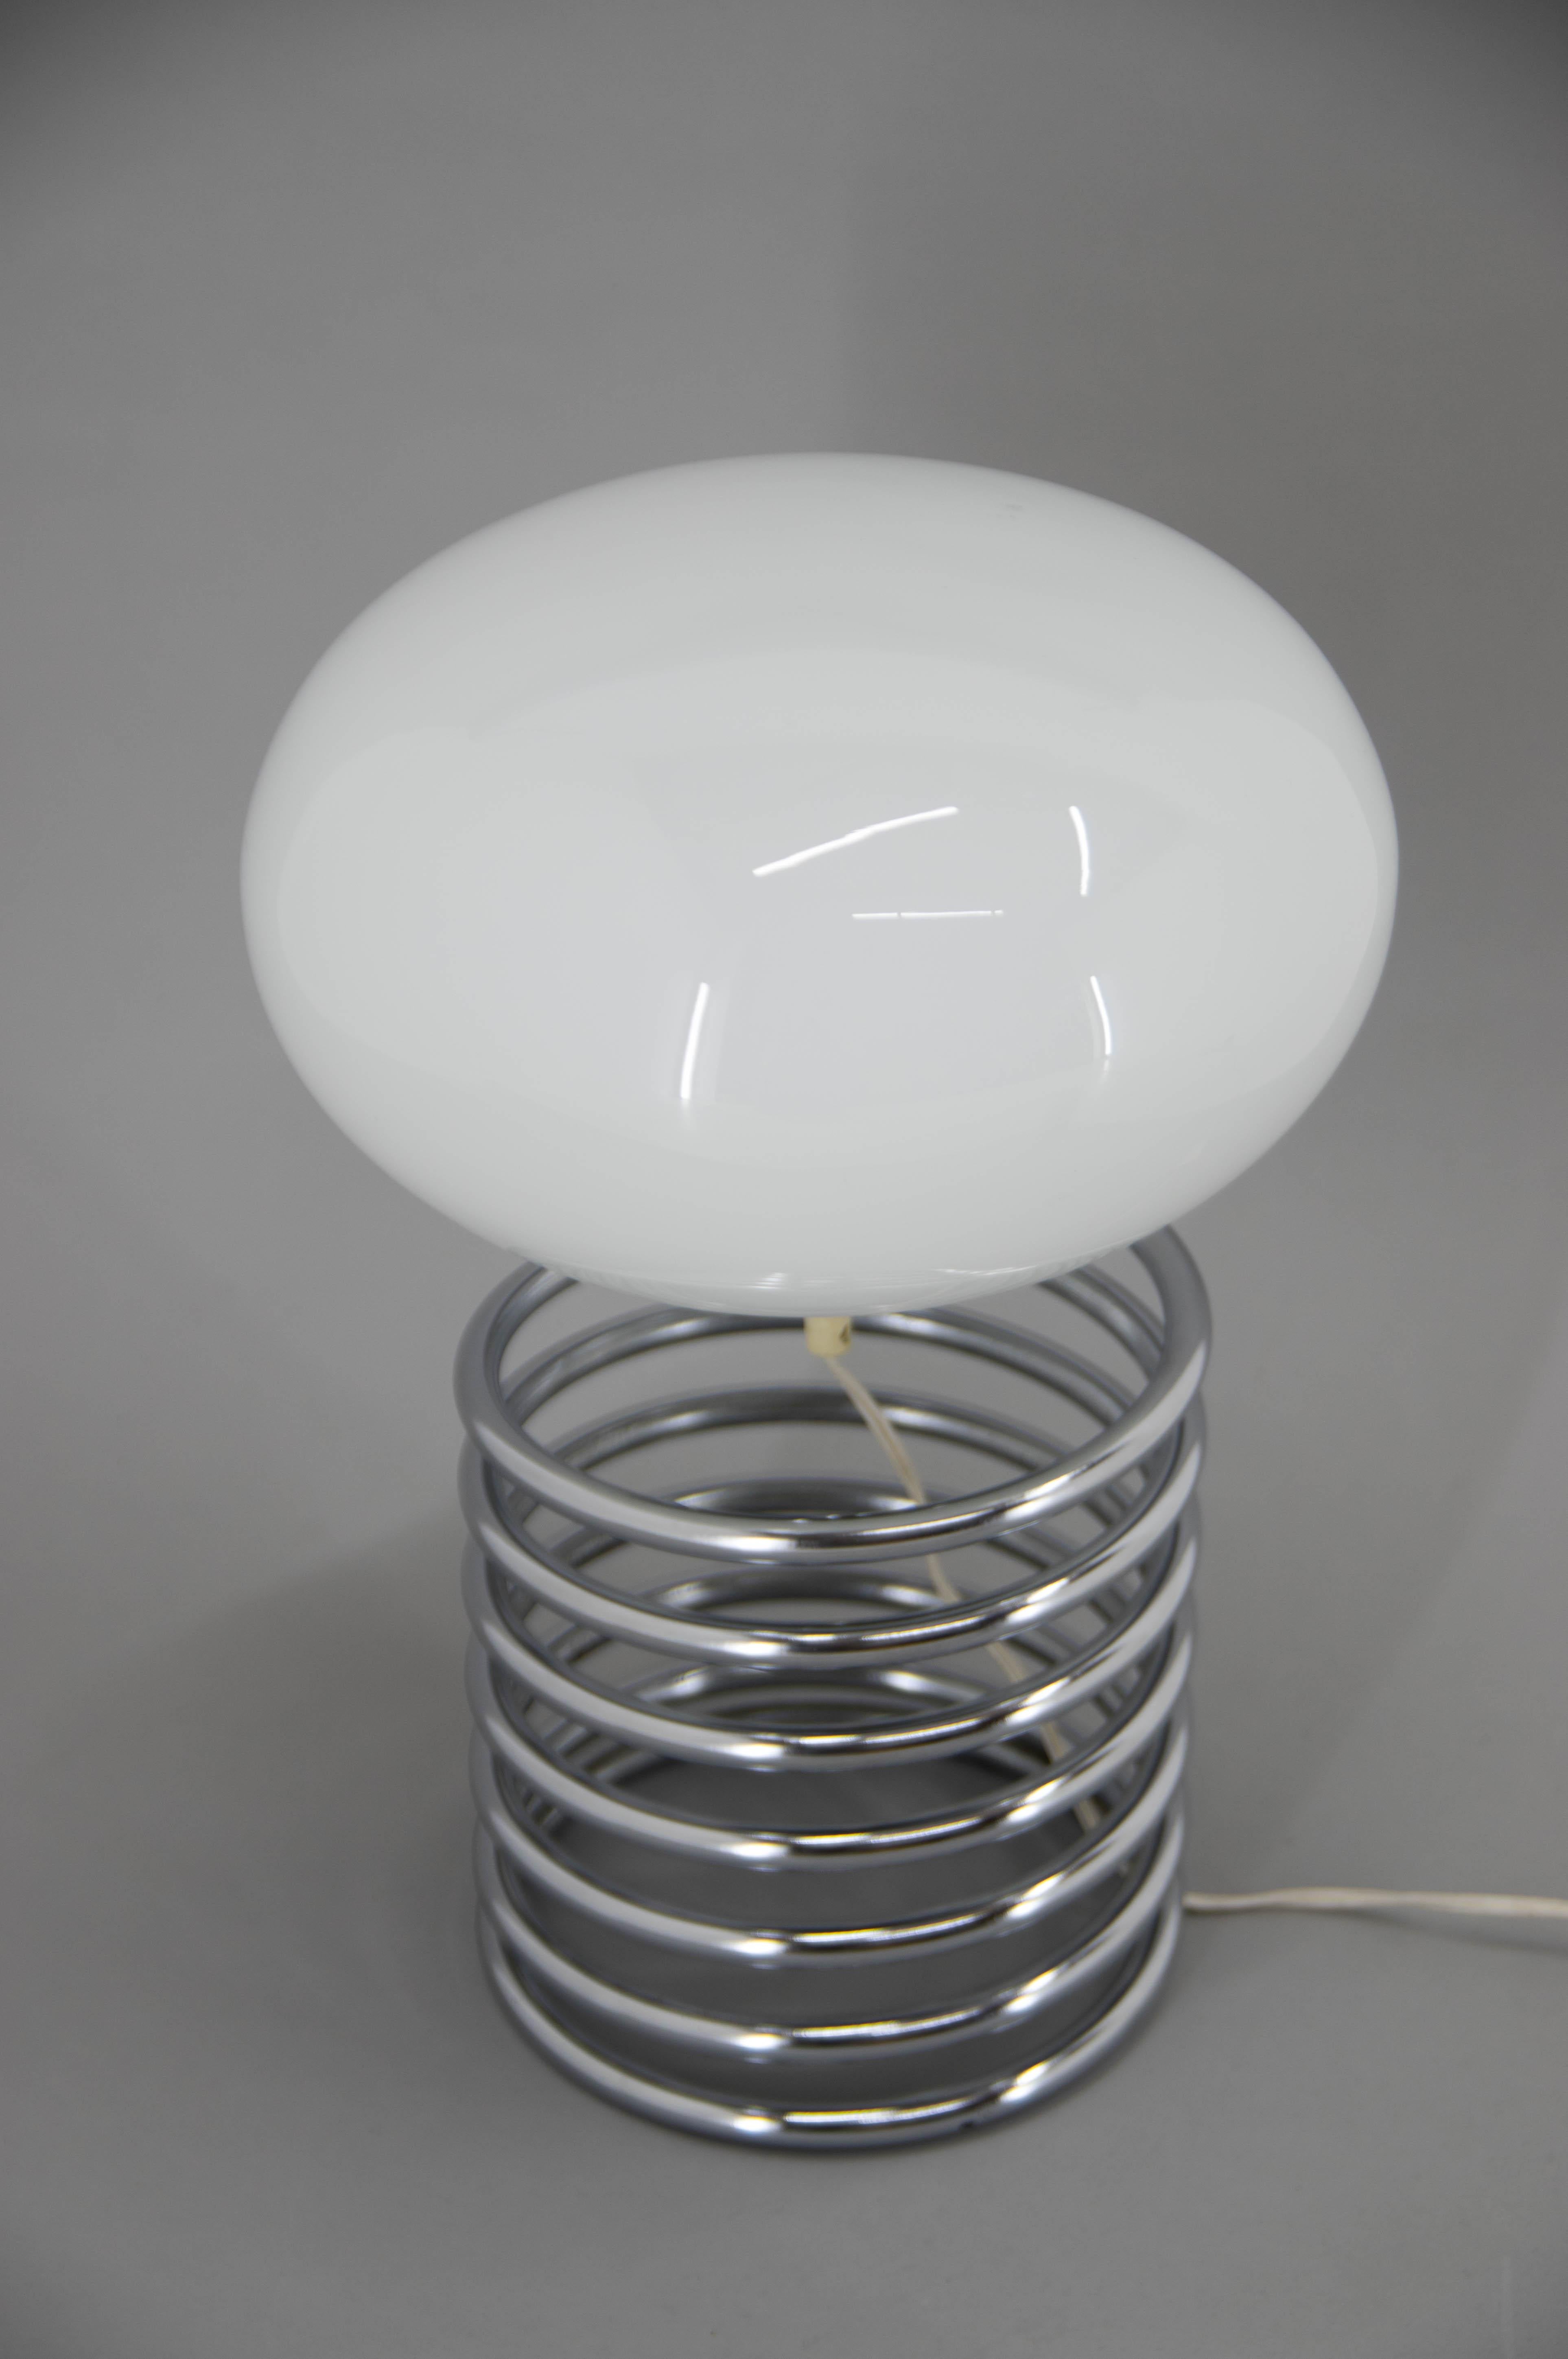 Original table spiral lamp designed by Ingo Maurer for Honsel in very good original condition.
Labeled
1x60W, E25-E27 bulb
US plug adapter included